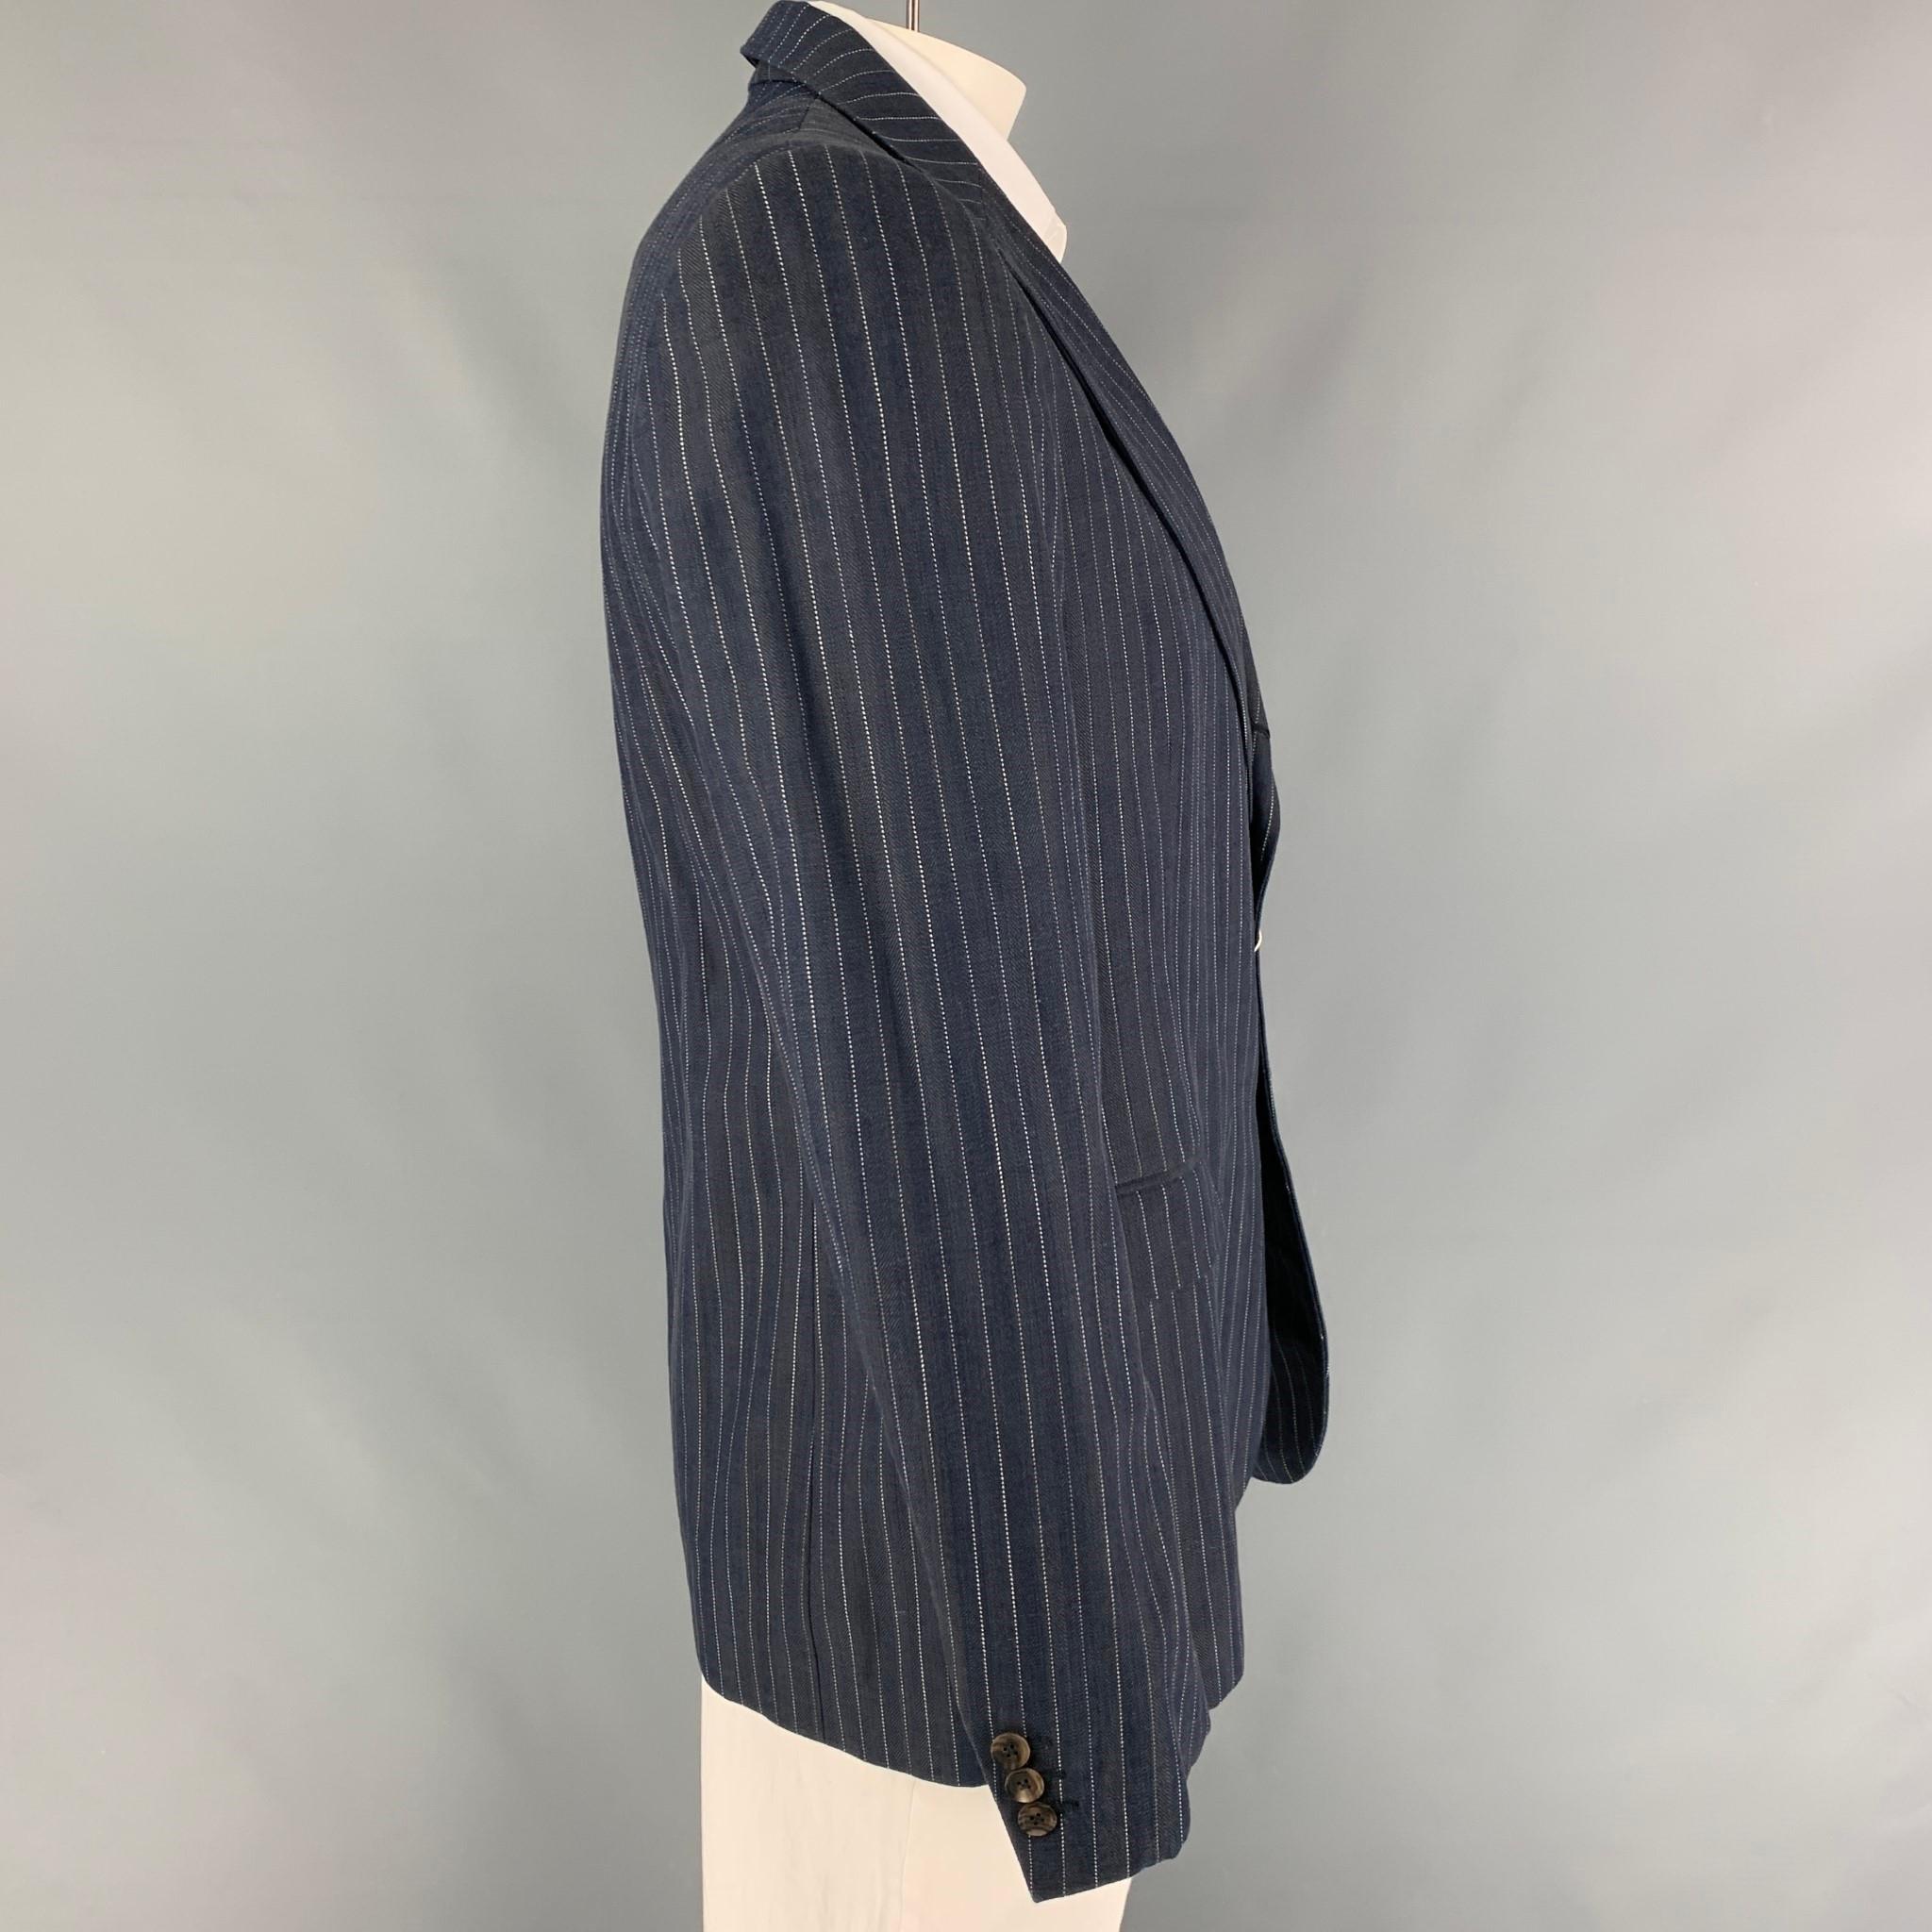 RRL by RALPH LAUREN sport coat comes in a indigo & white pinstripe cotton featuring a notch lapel, flap pockets, single back vent, and a three button closure. Made in Italy. 

New With Tags.
Marked: 44
Original Retail Price: